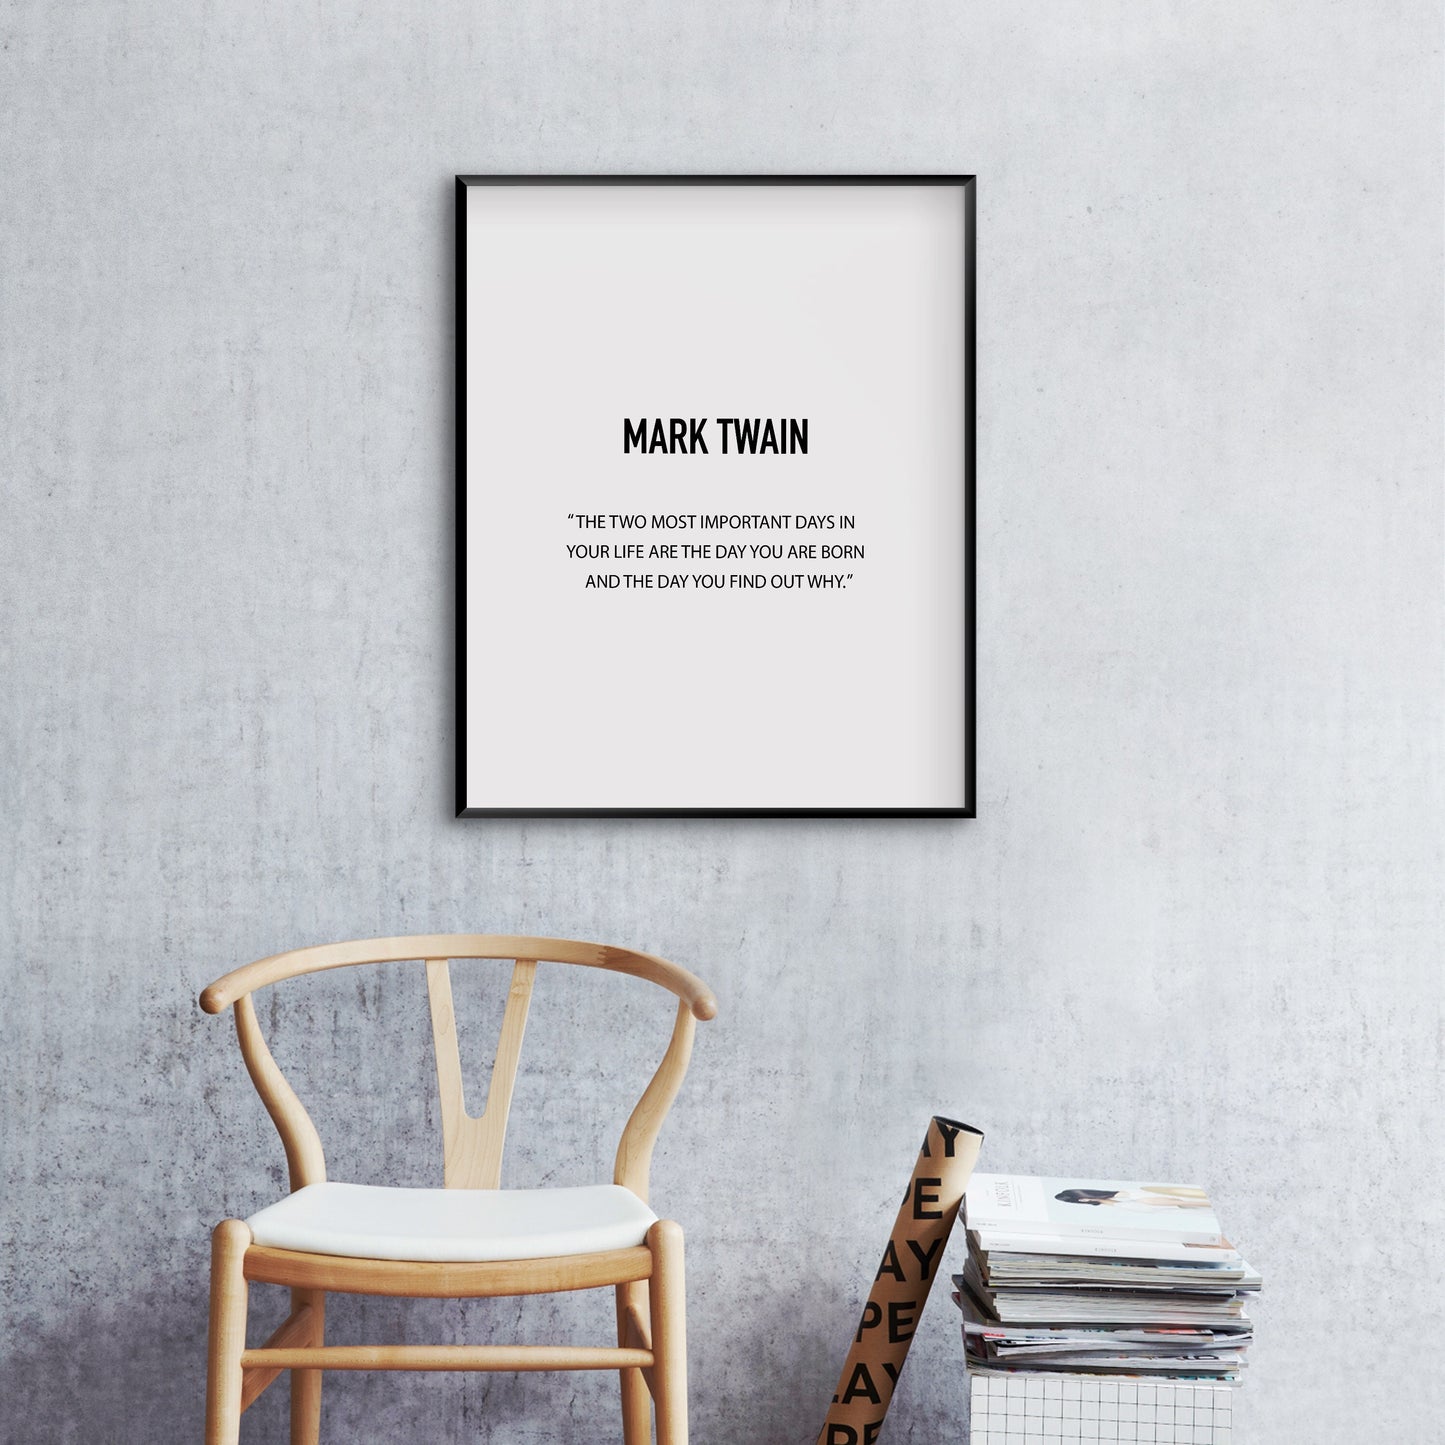 The two most important days in your life,Mark Twain quote,Mark Twain print,Inspirational print,Motivational quote,Inspirational wall decor